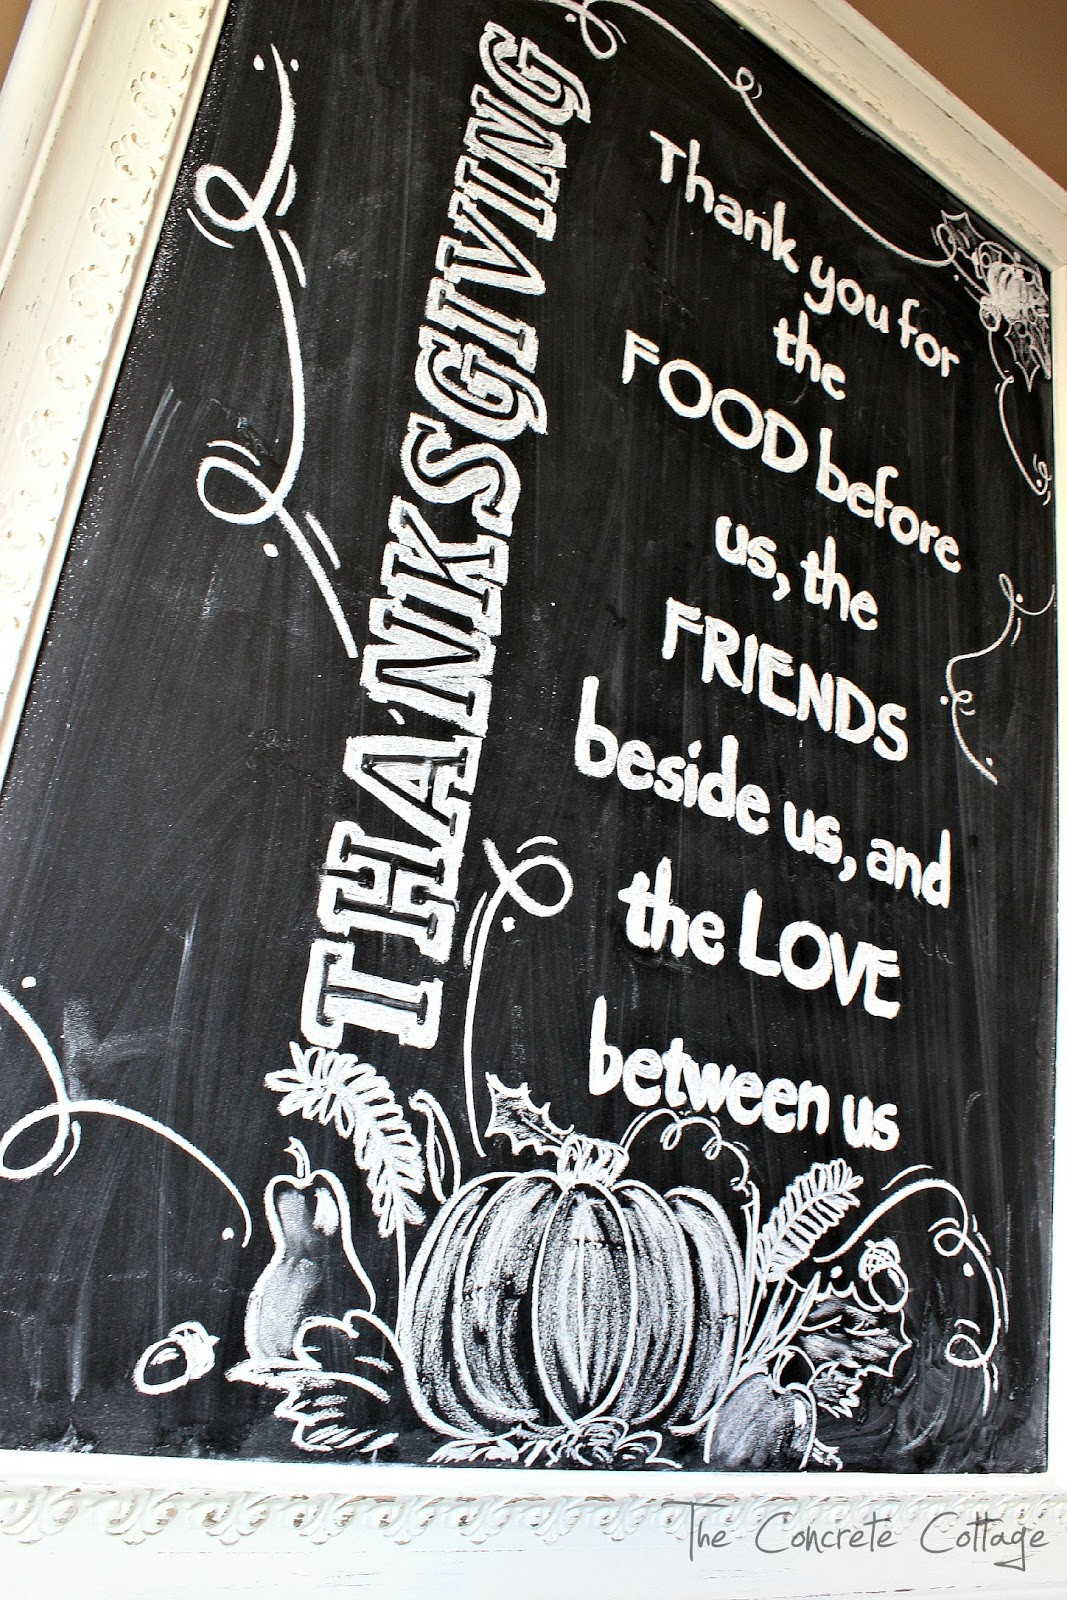 Thanksgiving Quotes Chalkboard
 The Concrete Cottage My Thanksgiving Chalkboard